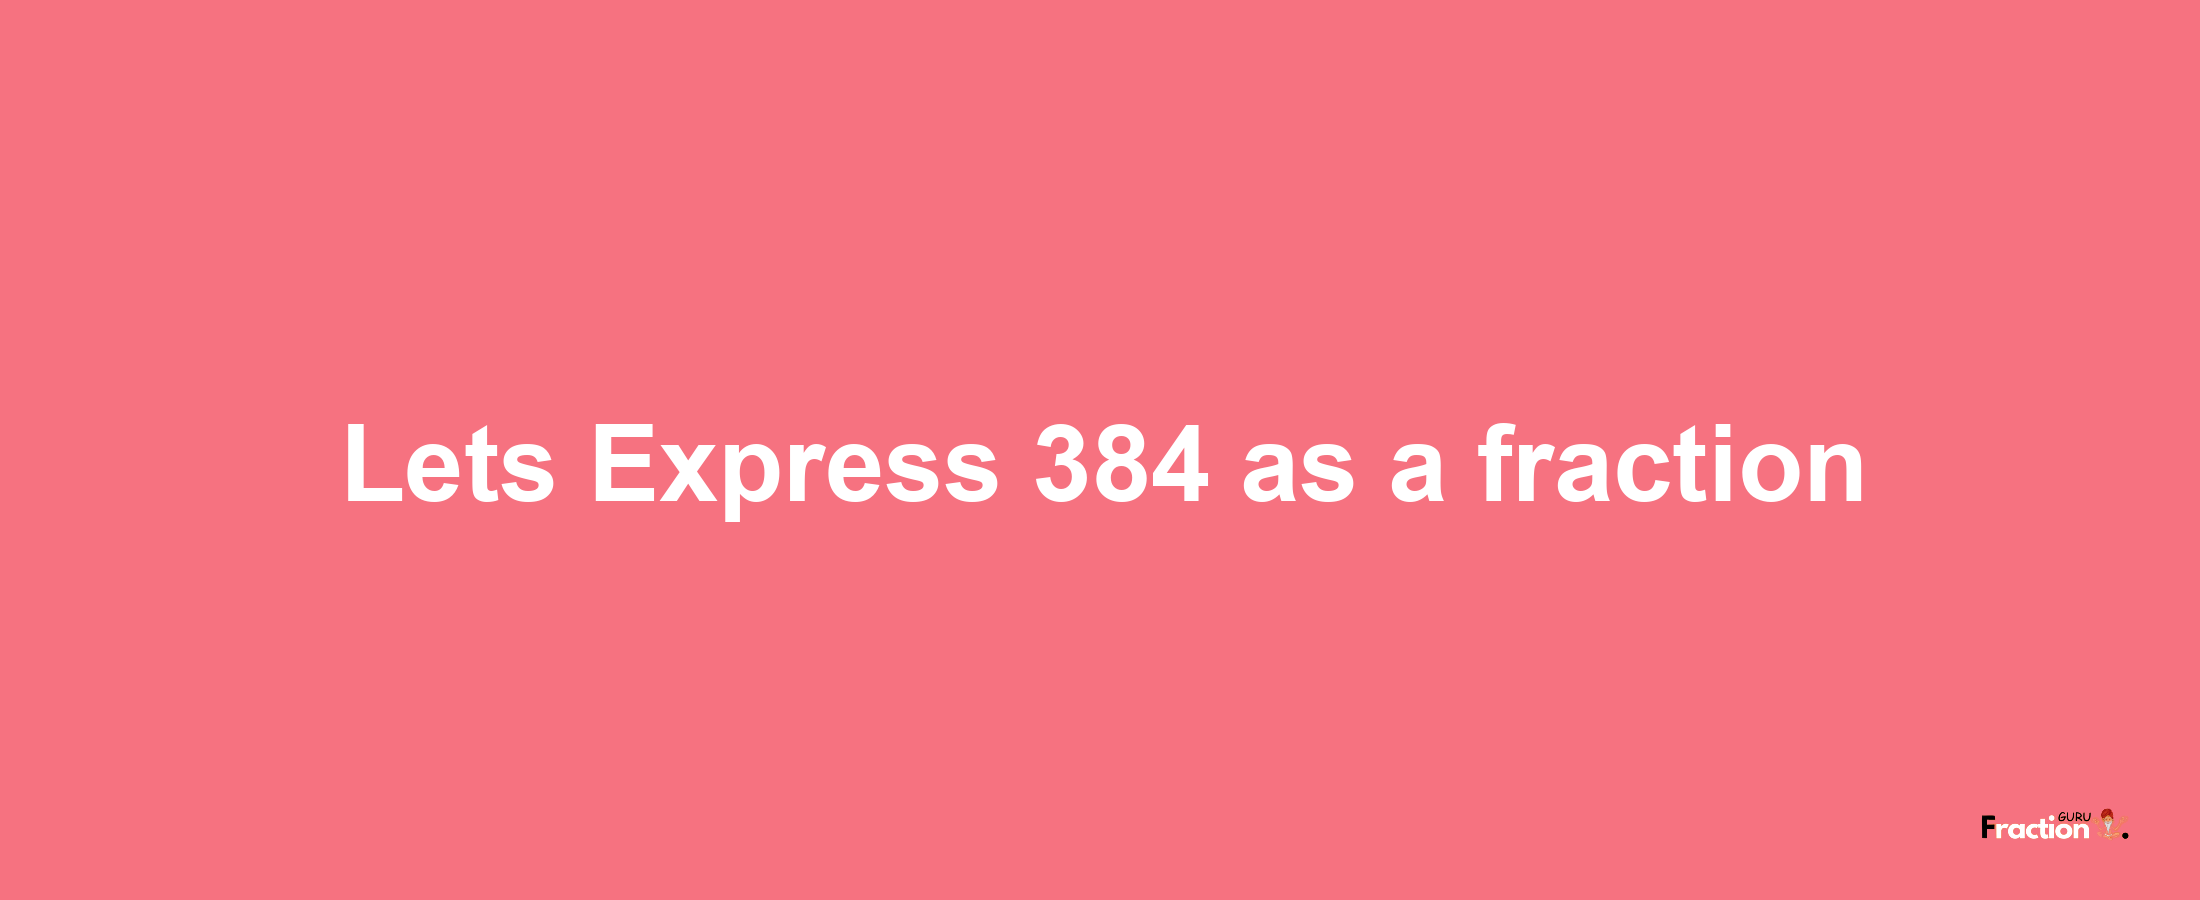 Lets Express 384 as afraction